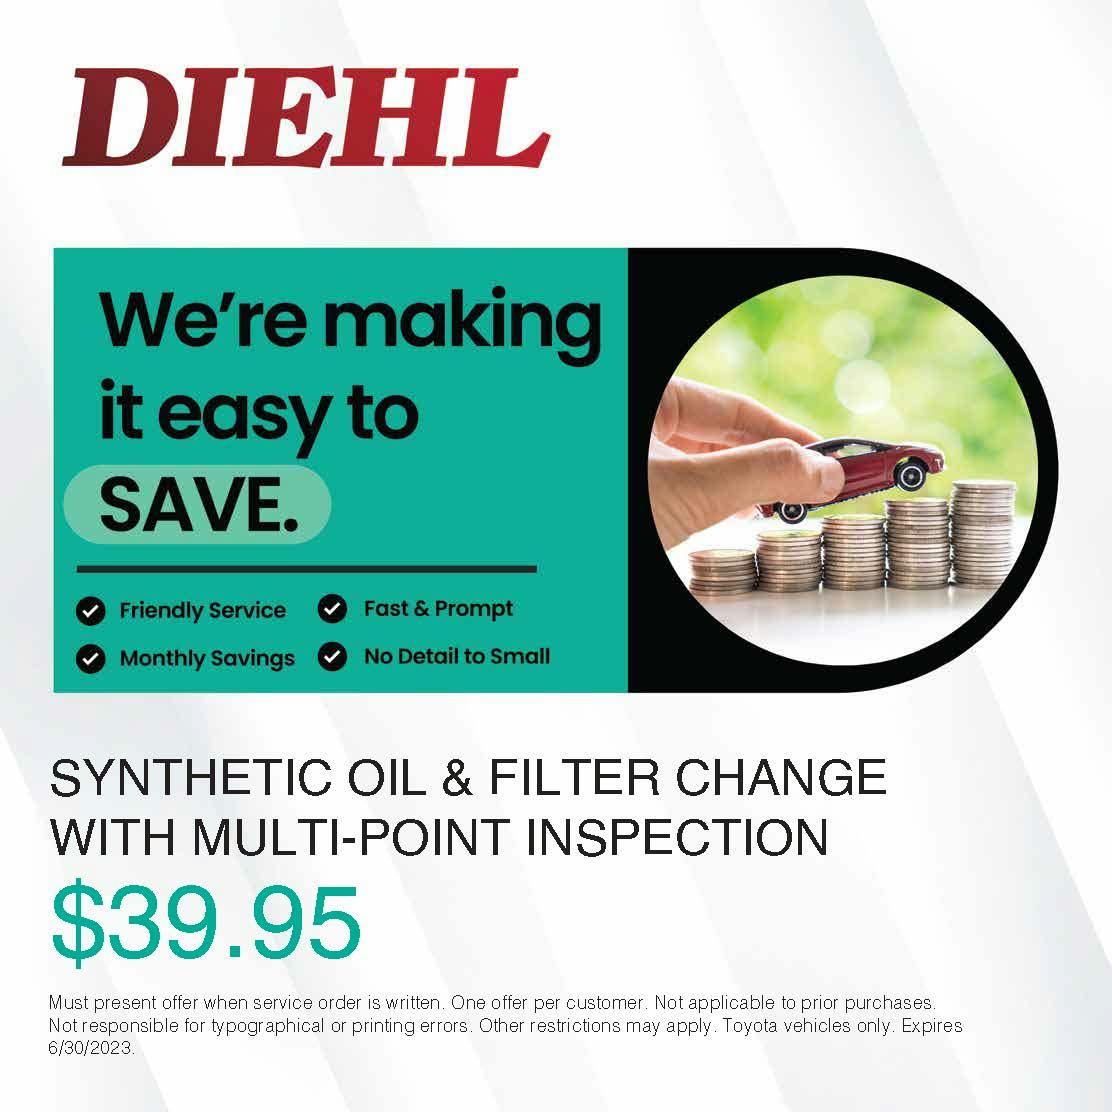 Oil and Filter Change Special with Multi-point Inspection | Diehl Toyota of Hermitage